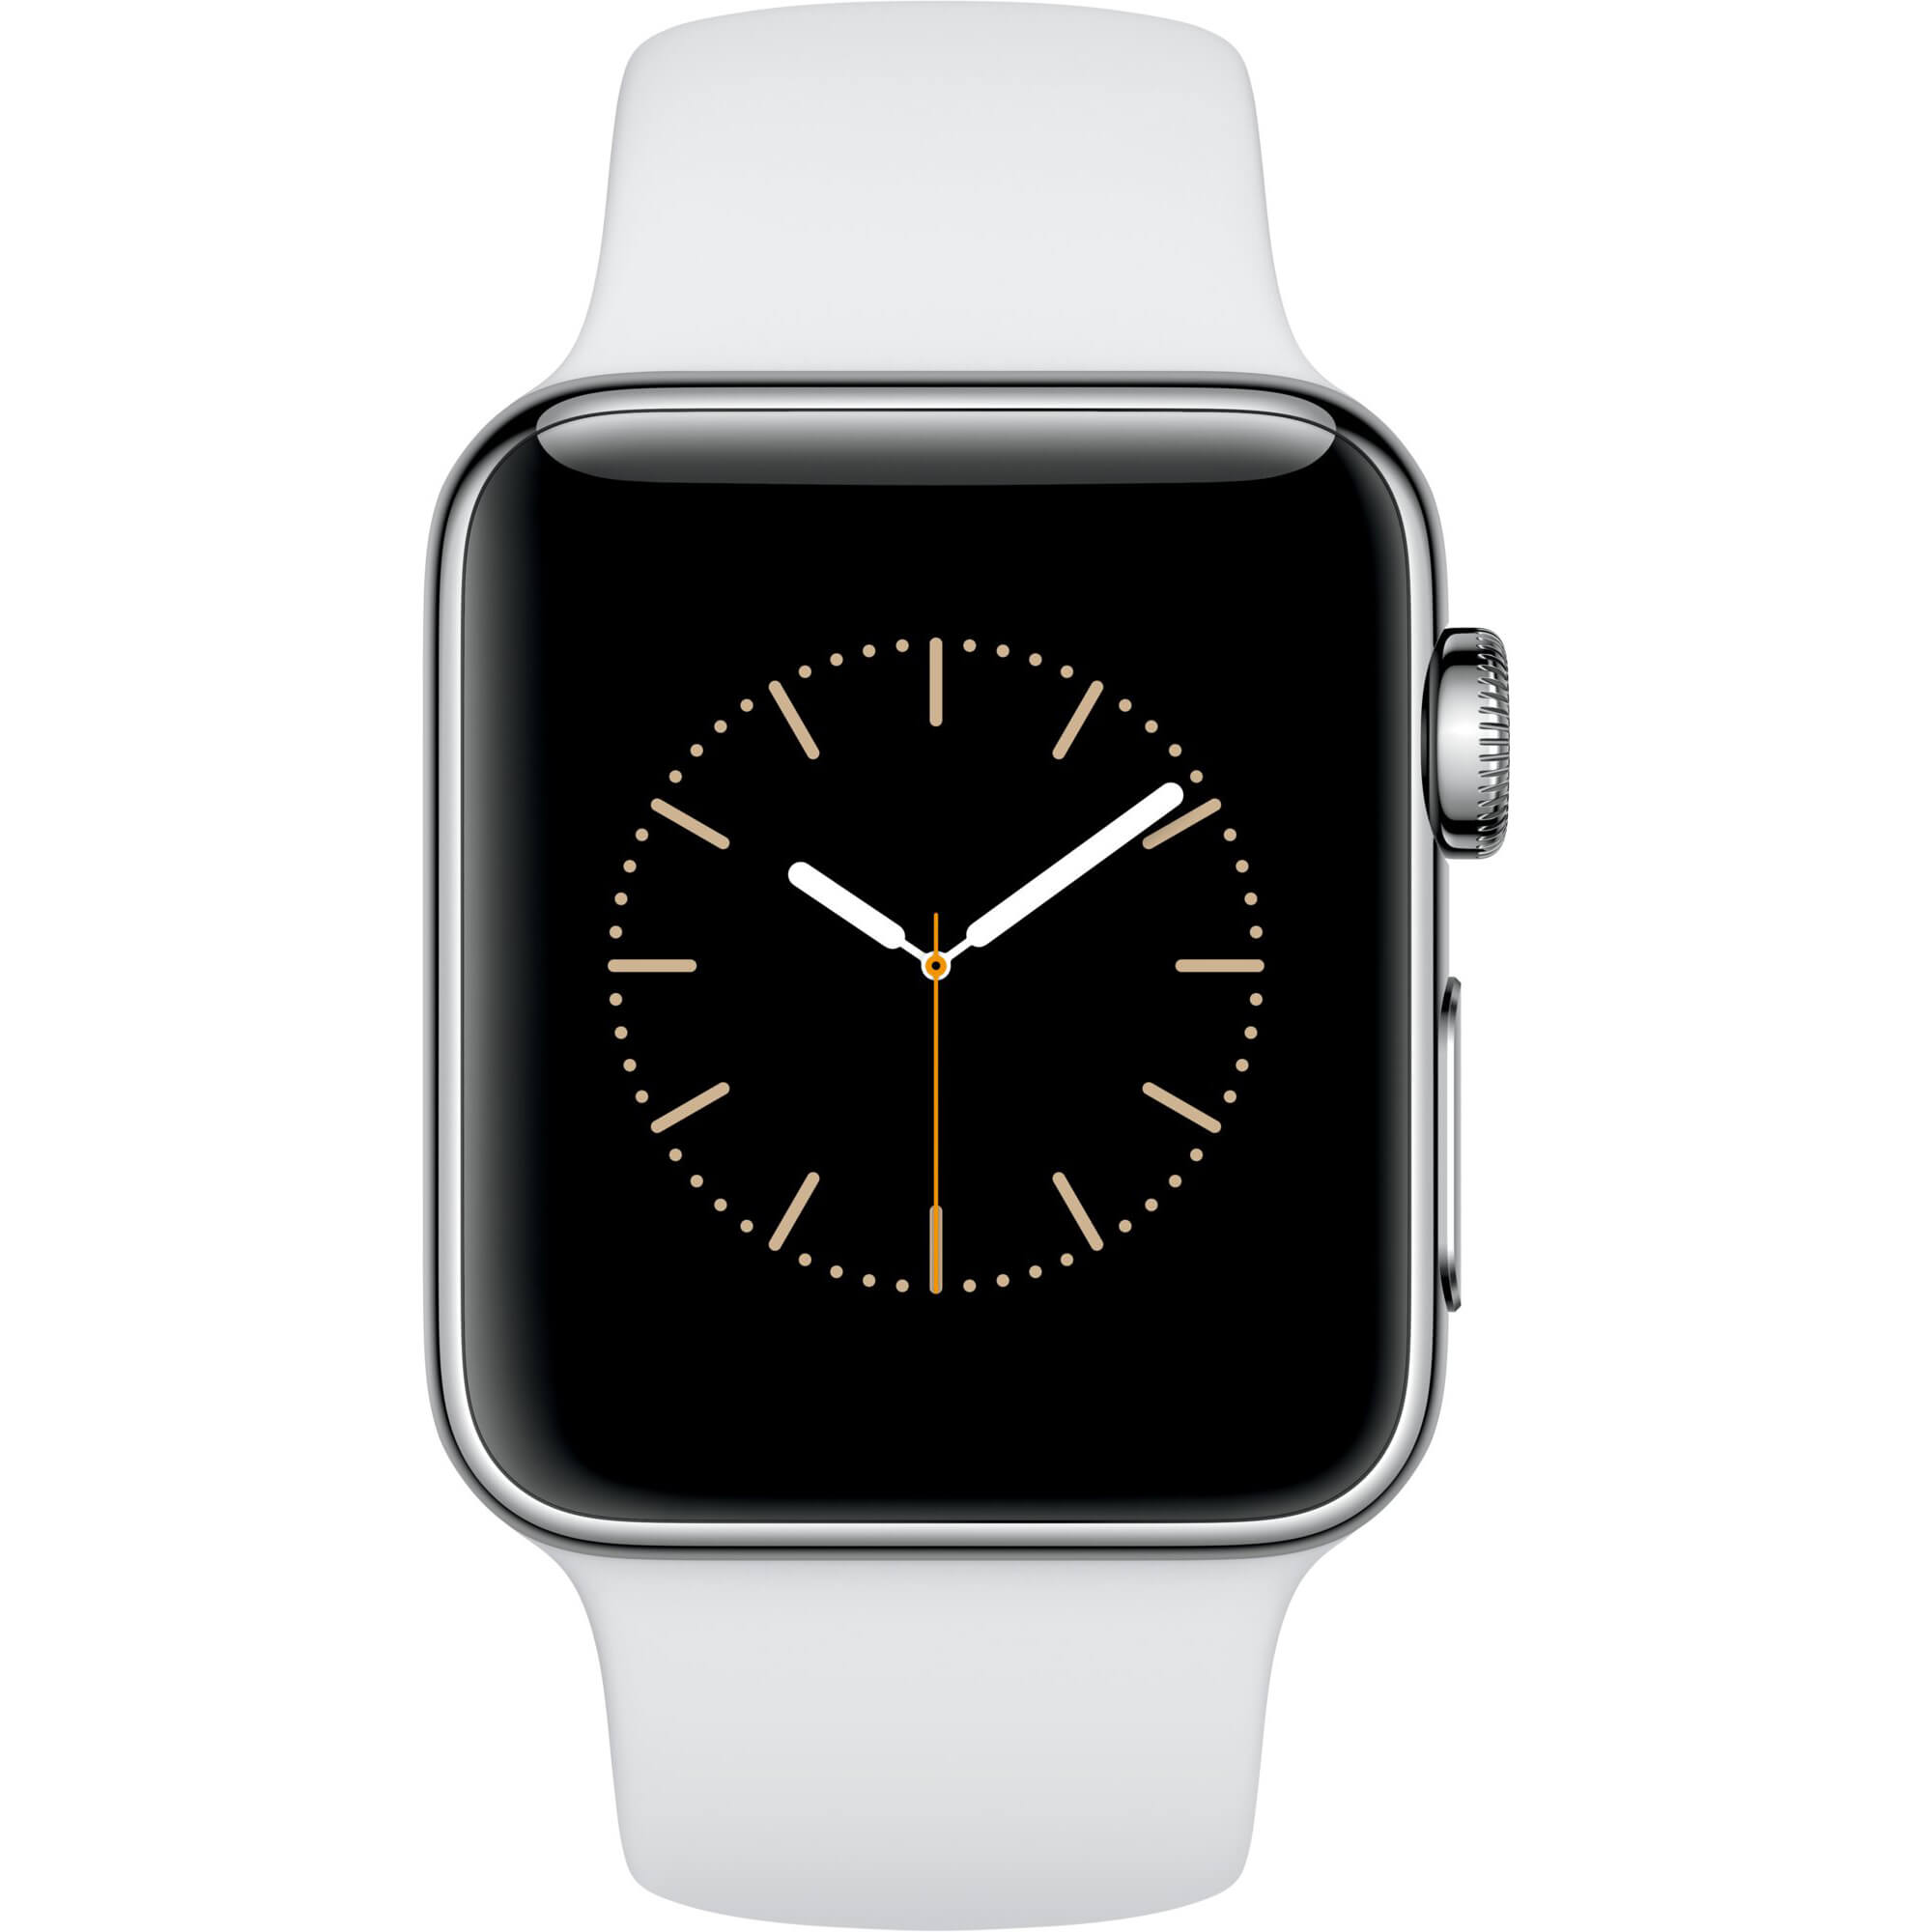  Apple Watch 2 38mm Stainless Steel Case, White Sport Band 